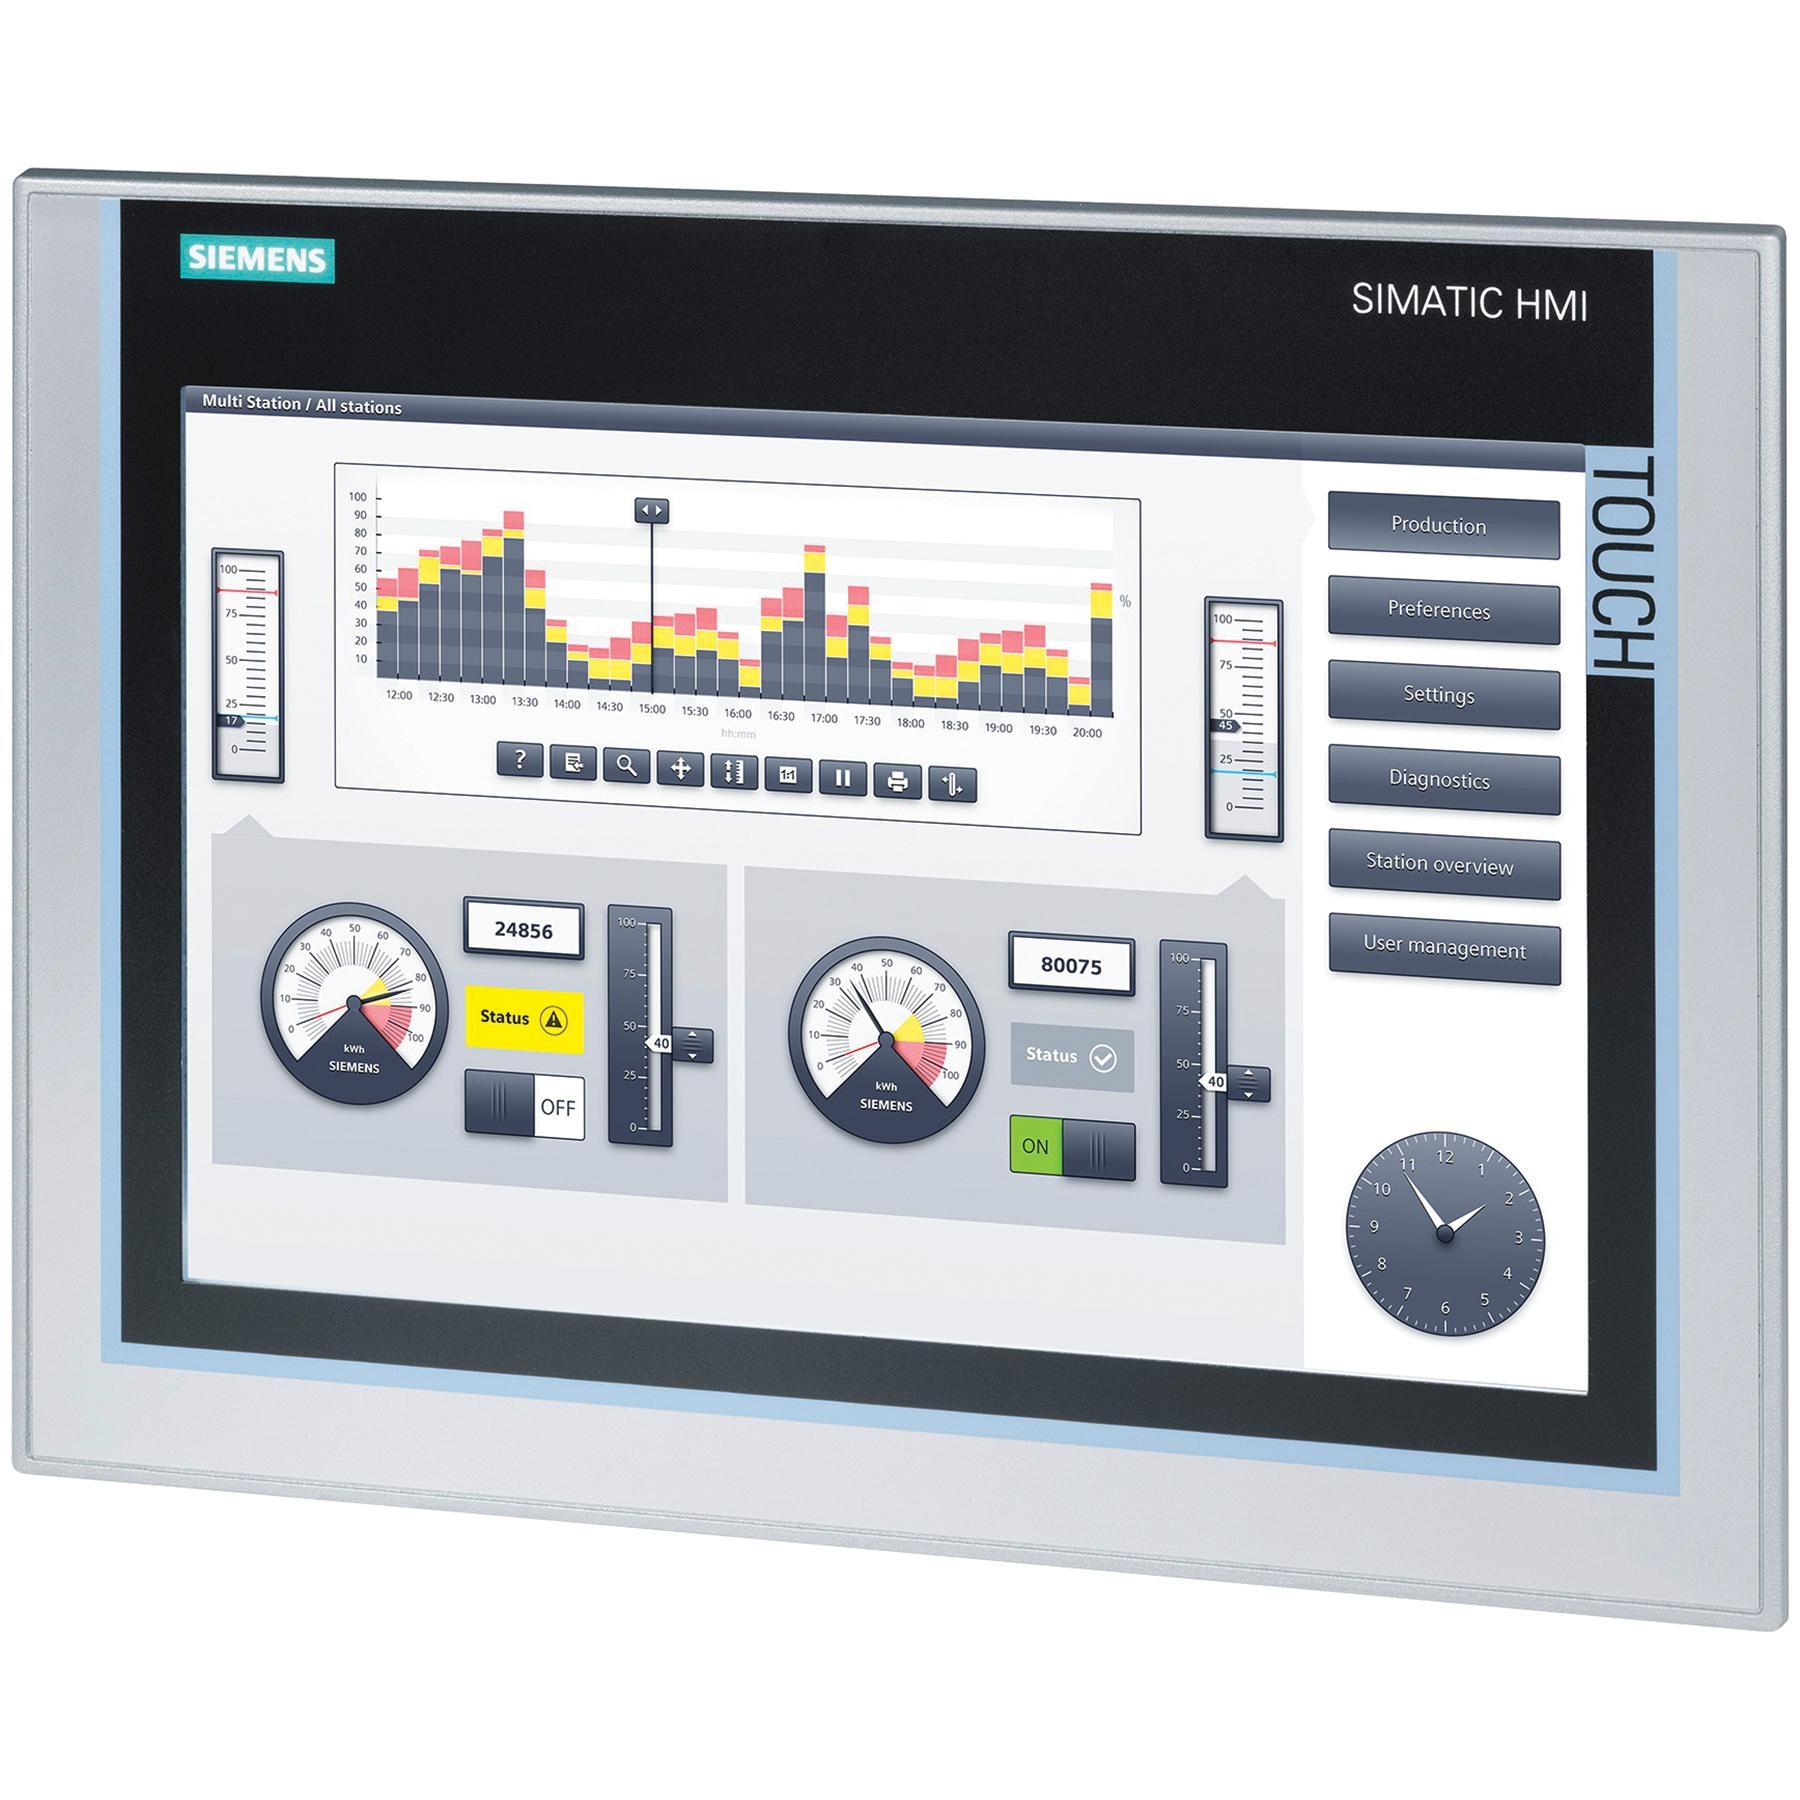 Siemens 6avmc010ax0 Human Machine Interface 12 Inch Widescreen Tft Display With 16 Million Colors Colors And 1280 X 800 Pixels Hmi Plcs Hmi Industrial Controls And Automation